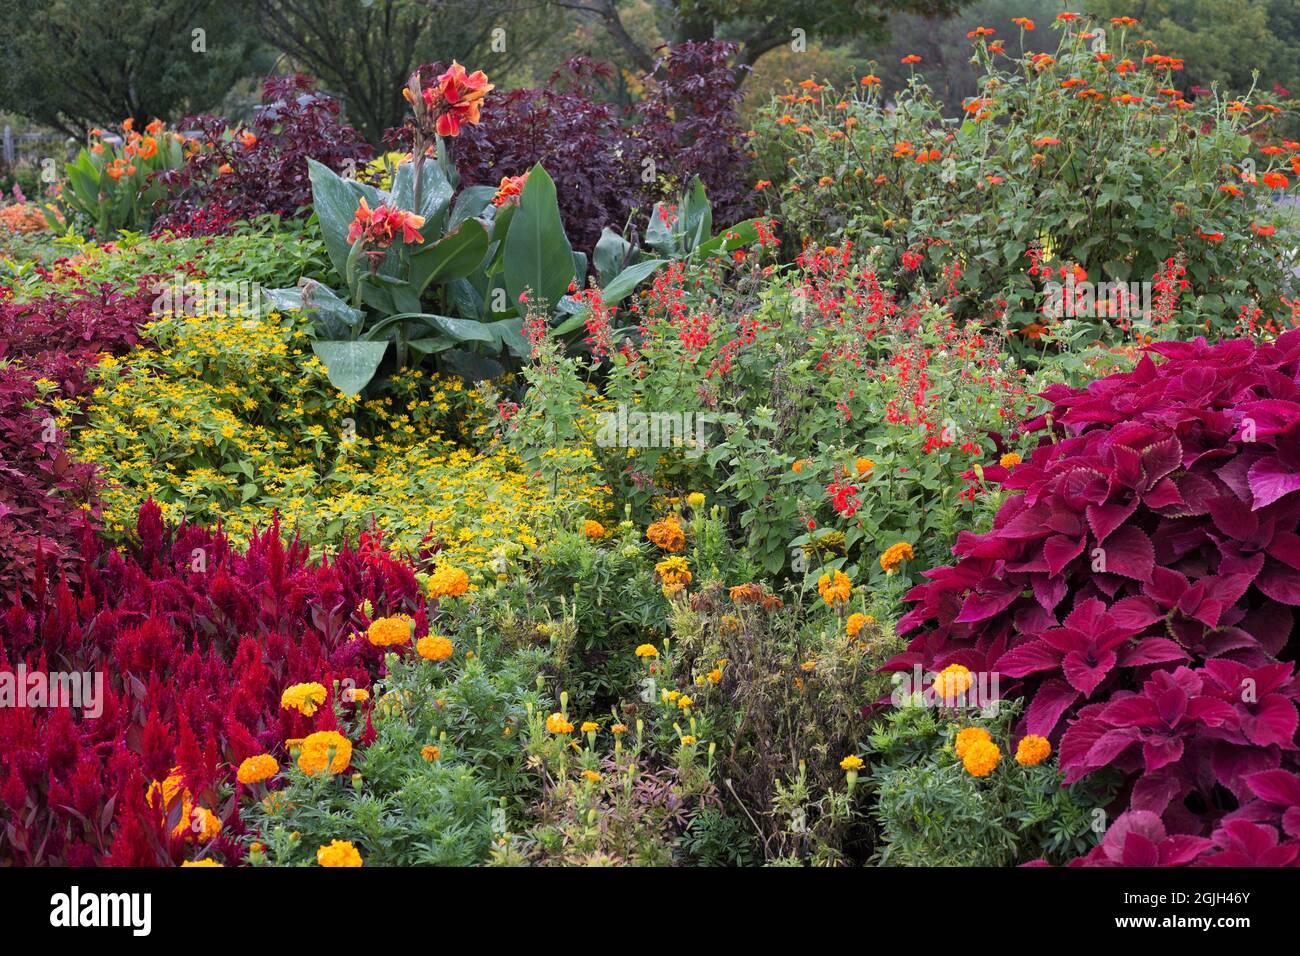 A garden bed consisting of warm colors. Stock Photo